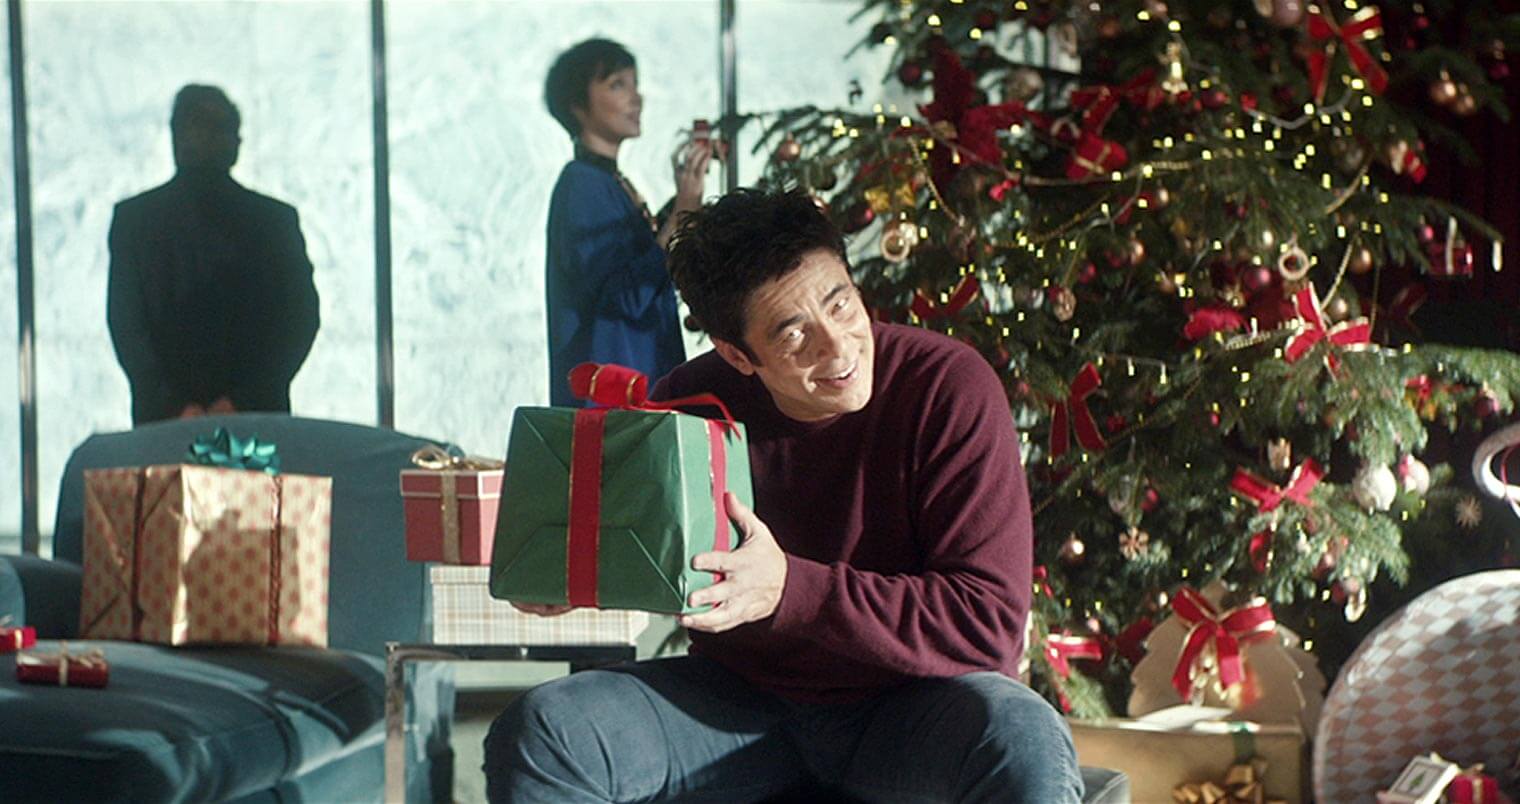 Benicio Del Toro Spreads Holiday Cheer and Humor in Witty New Heineken® Commercial, featured image